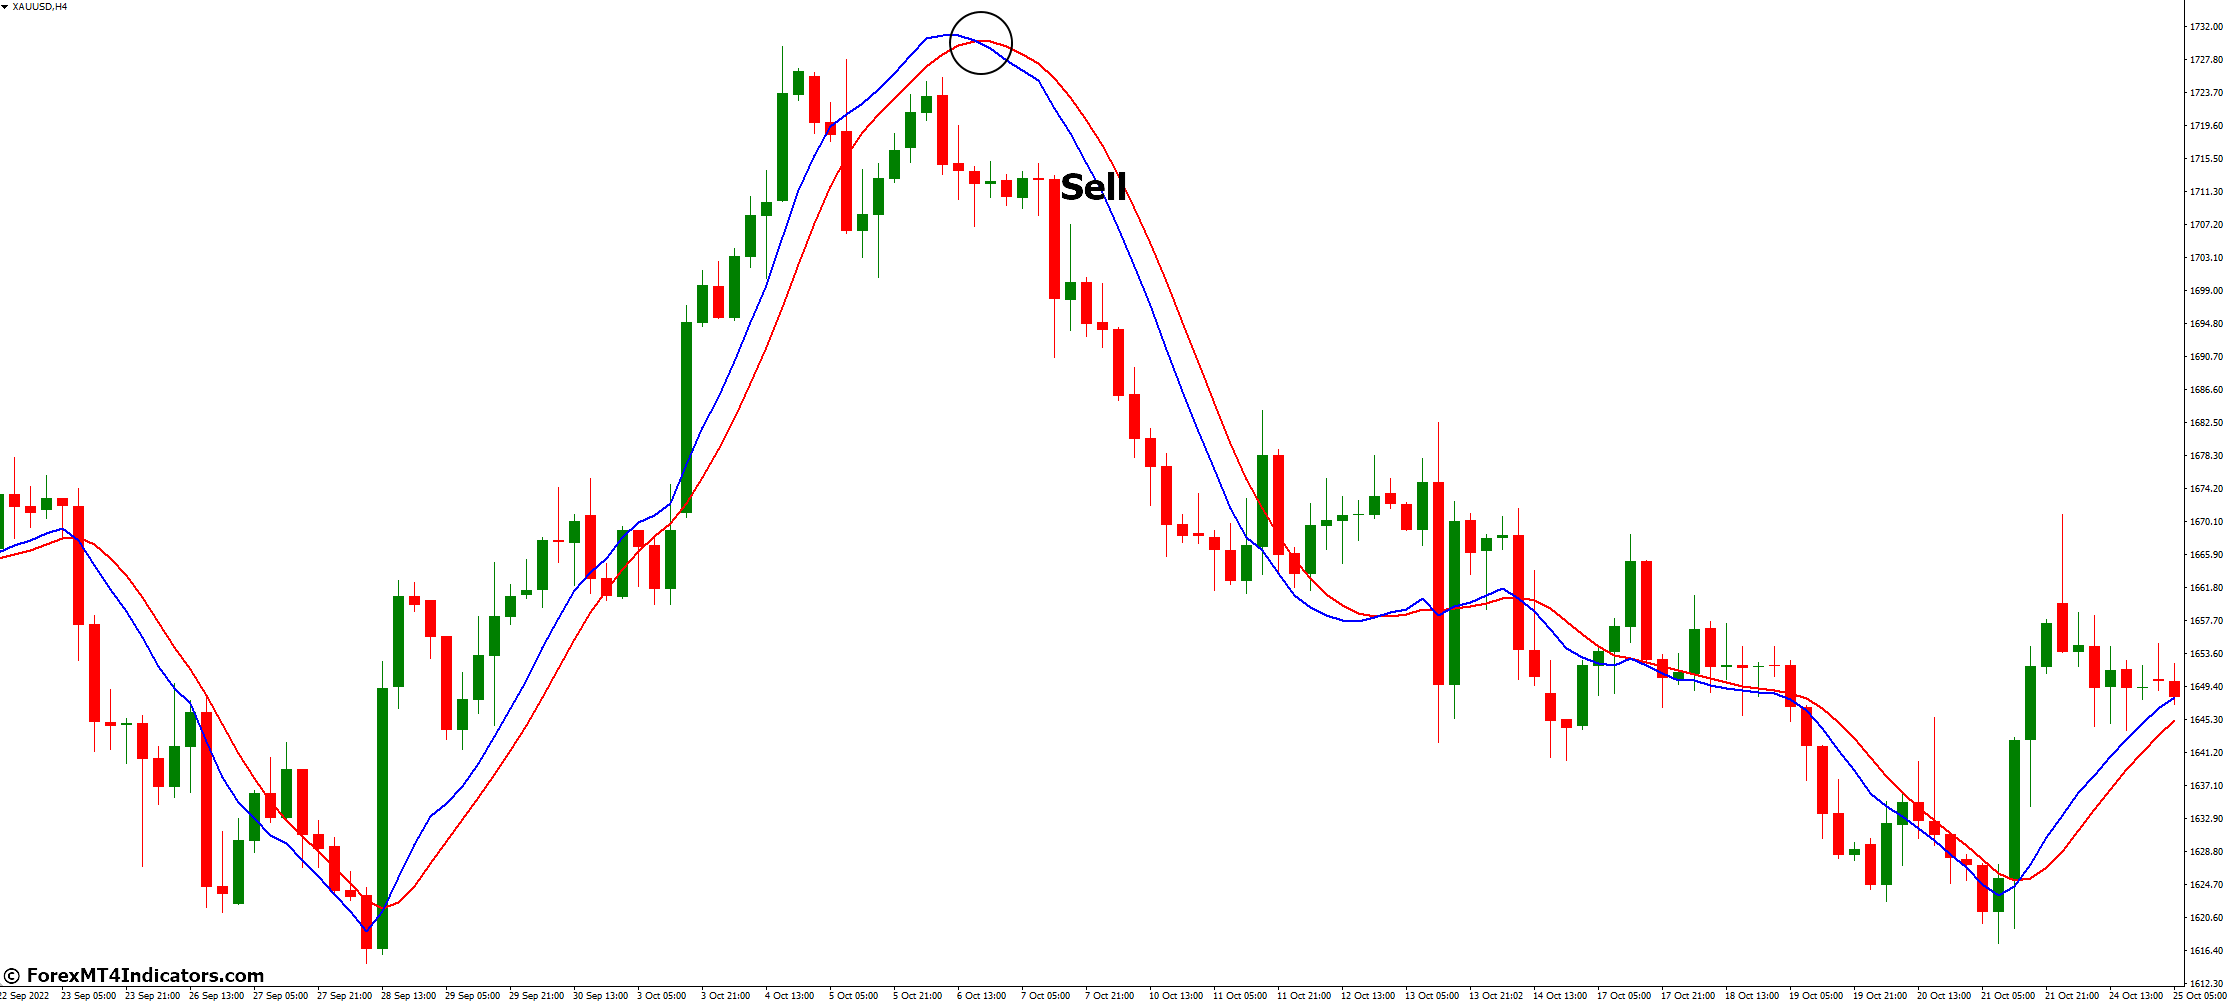 How to Trade with 100 Pips MT4 Indicator - Sell Entry